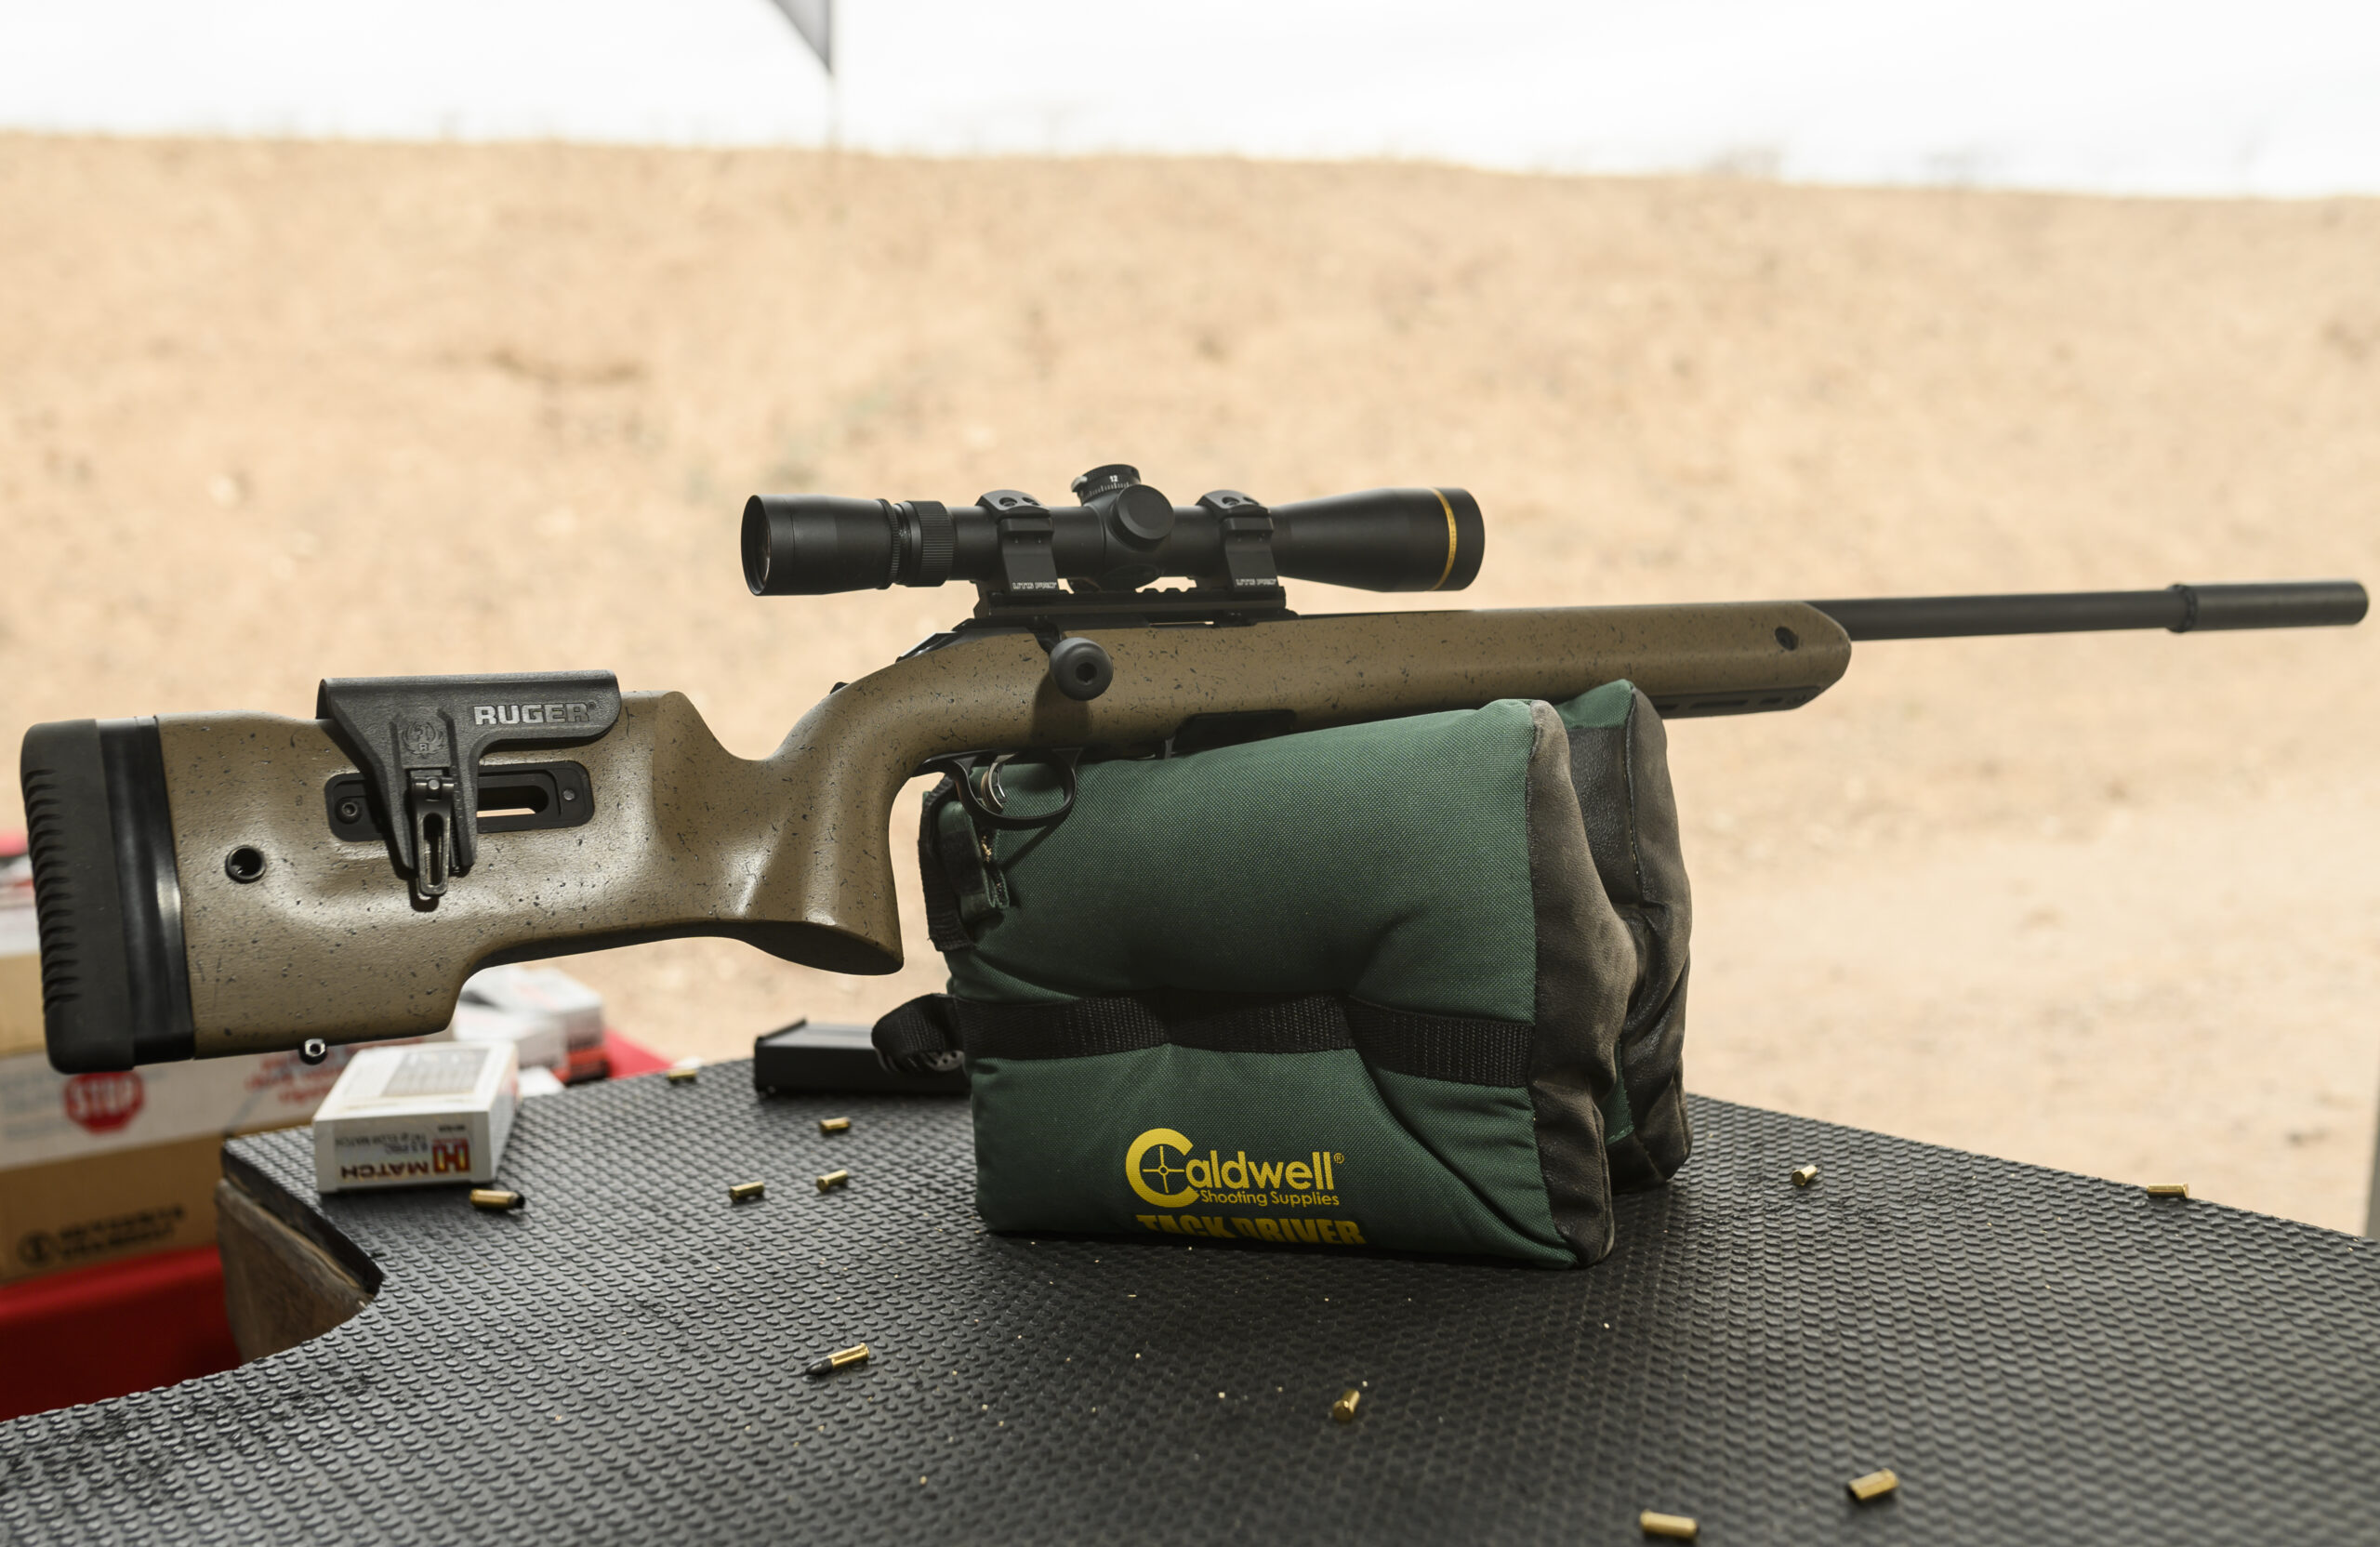 a rimfire rifle resting on a shooting bag at the range with empty 22 shells on the table